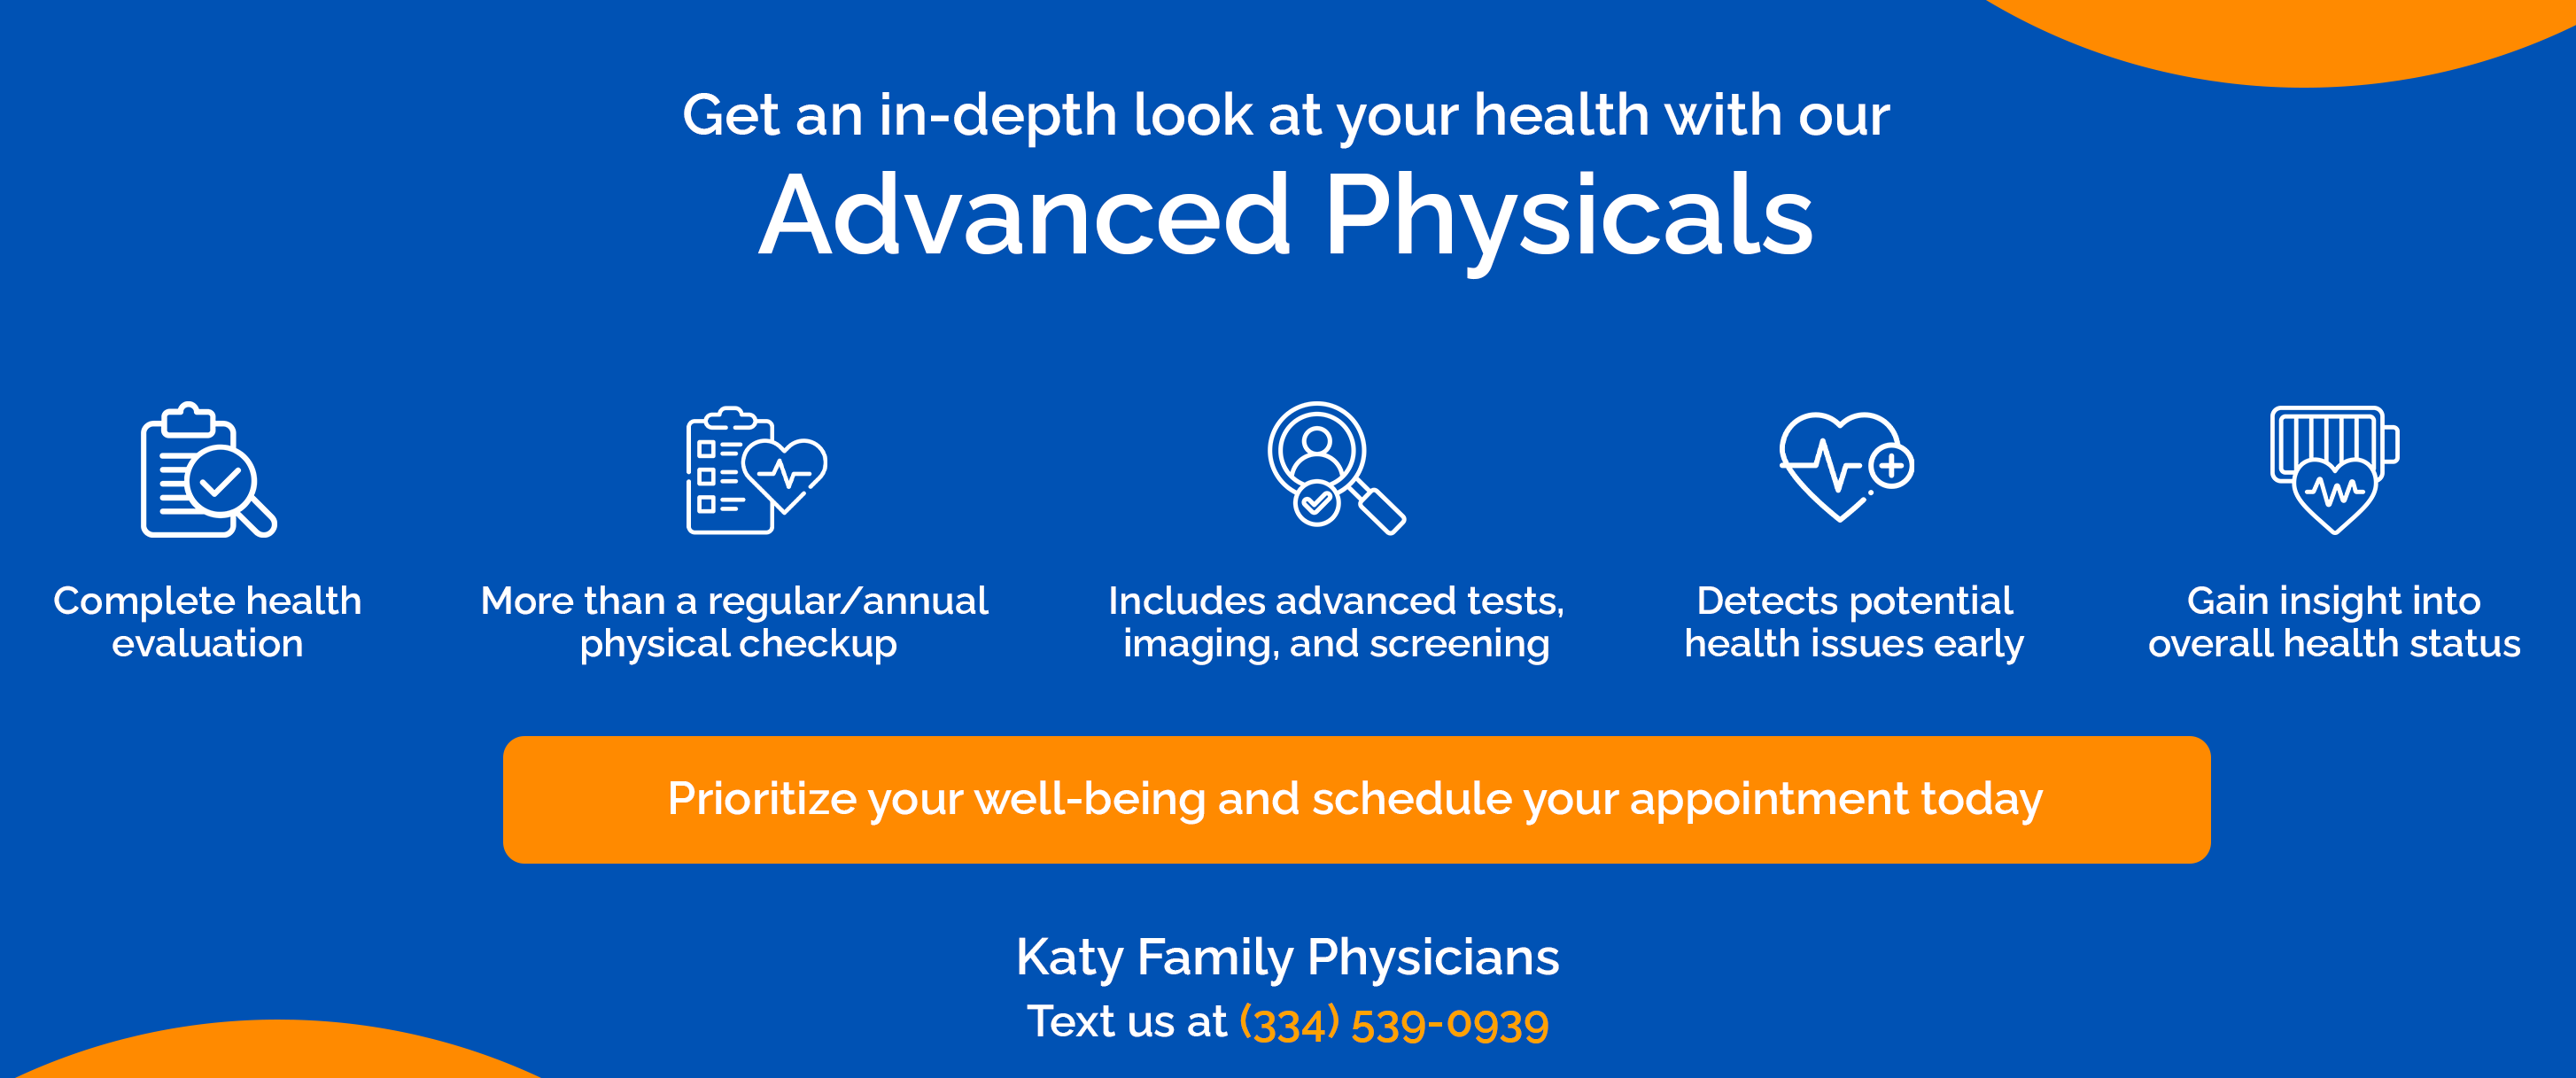 Advanced Physicals